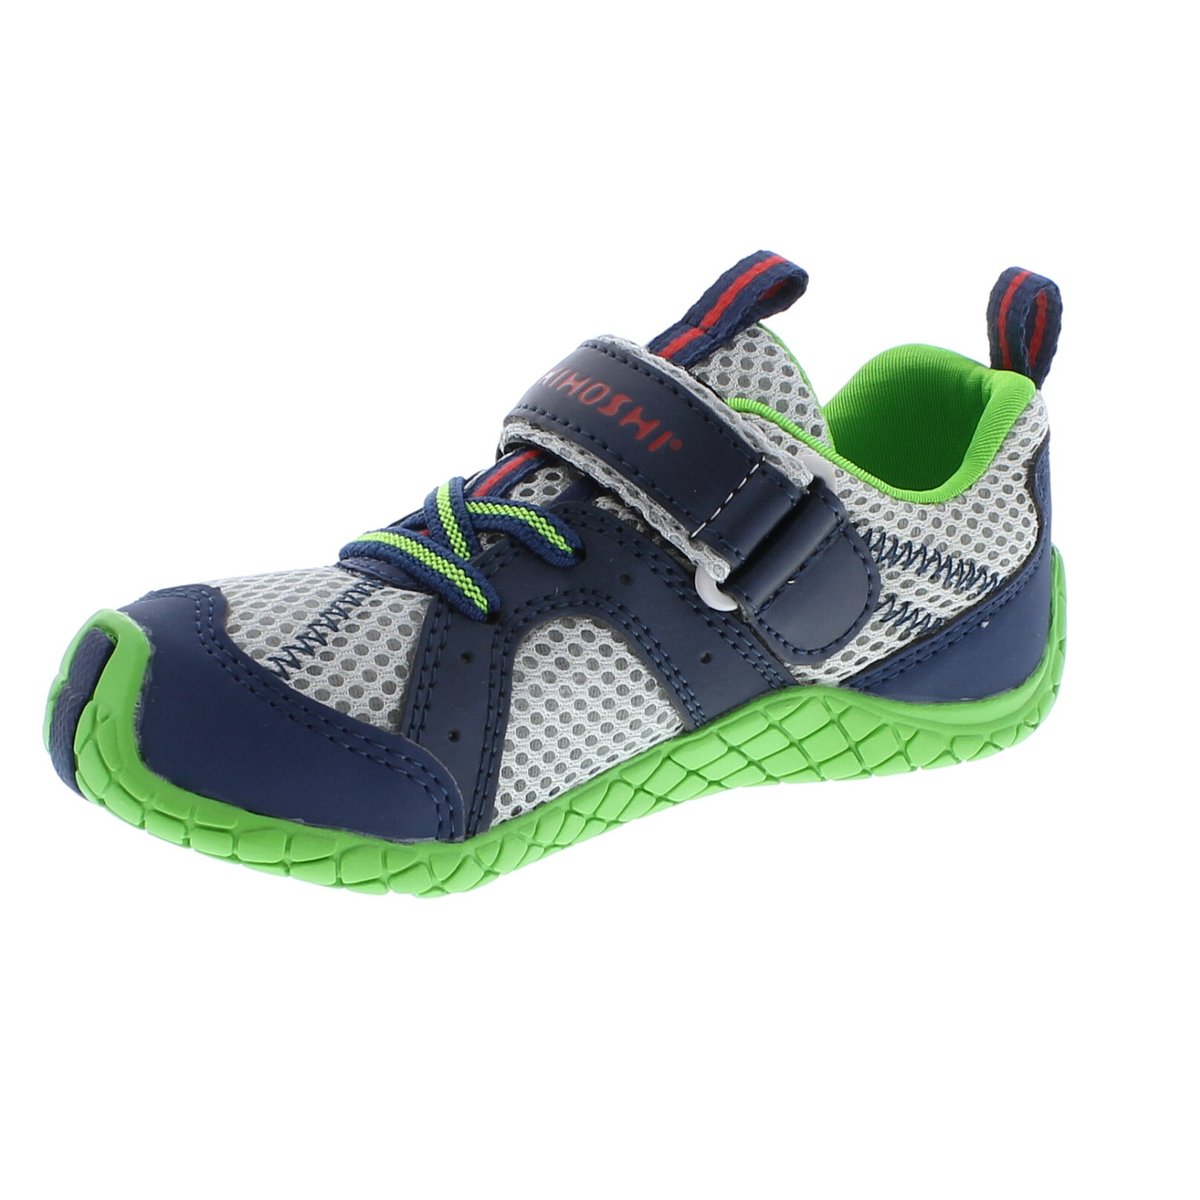 Child Tsukihoshi Marina Sneaker in Navy/Green from the front view